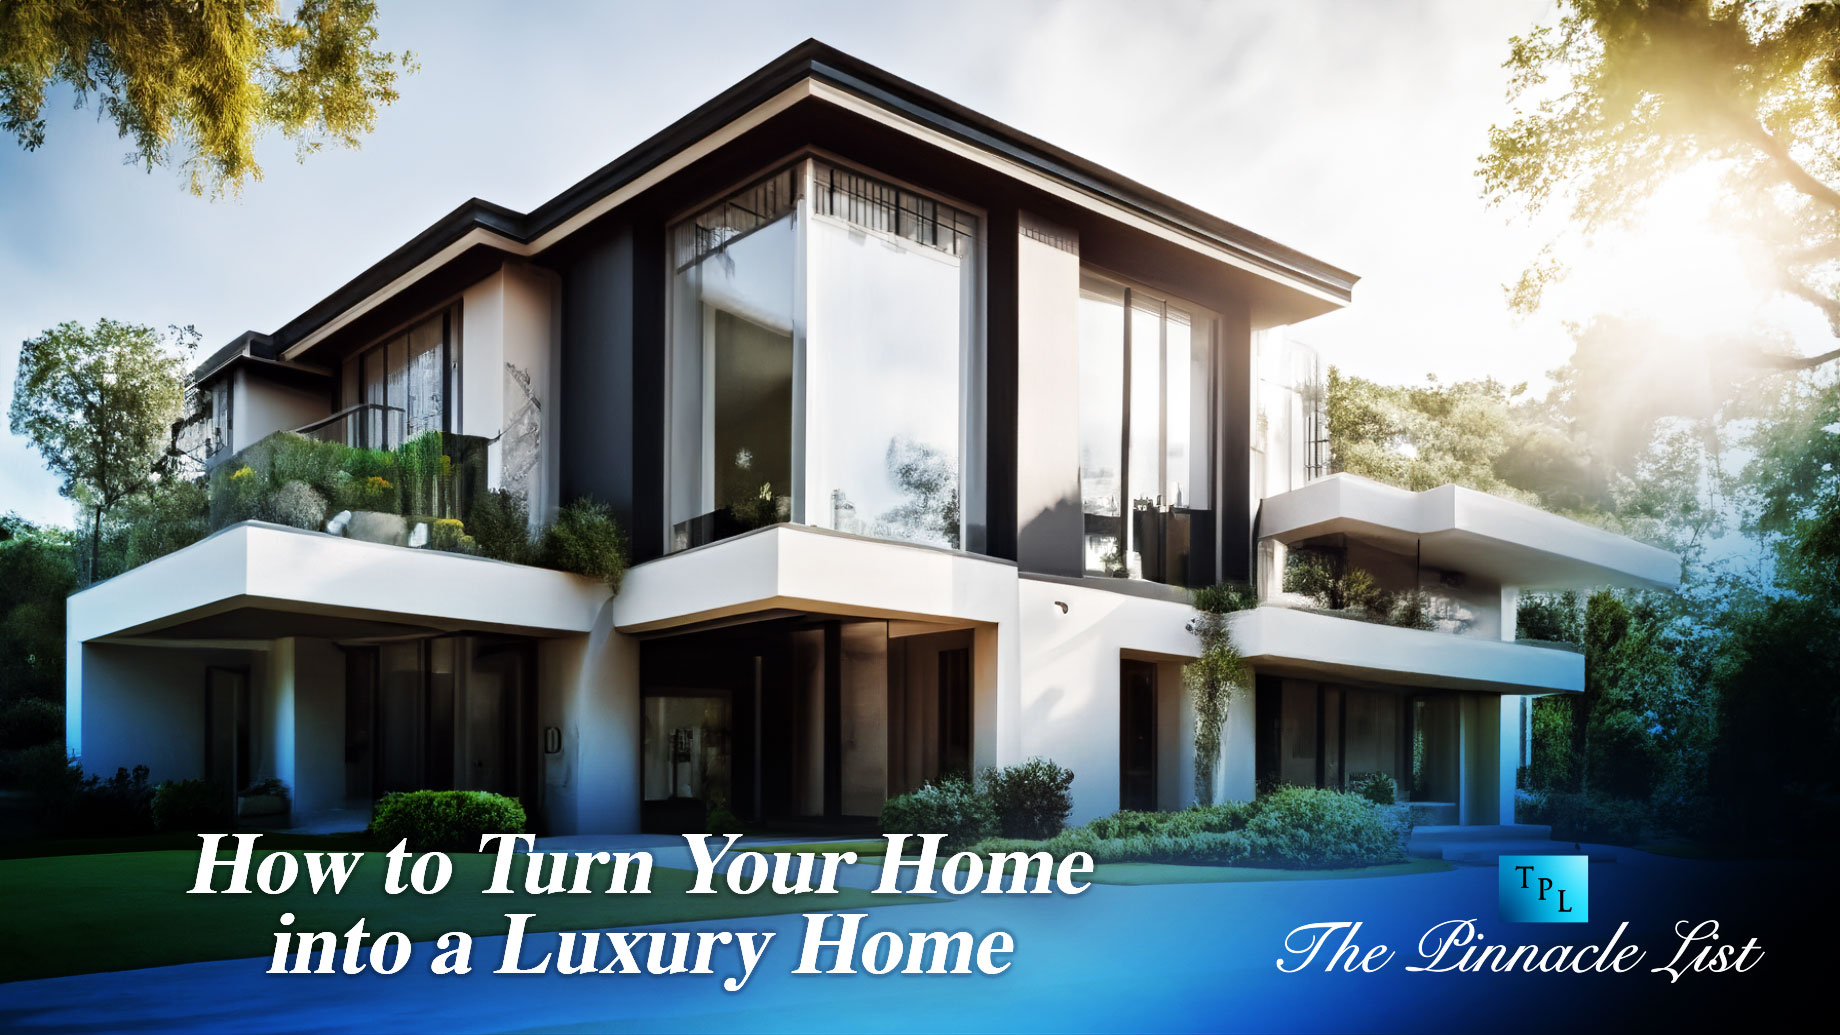 How to Turn Your Home into a Luxury Home